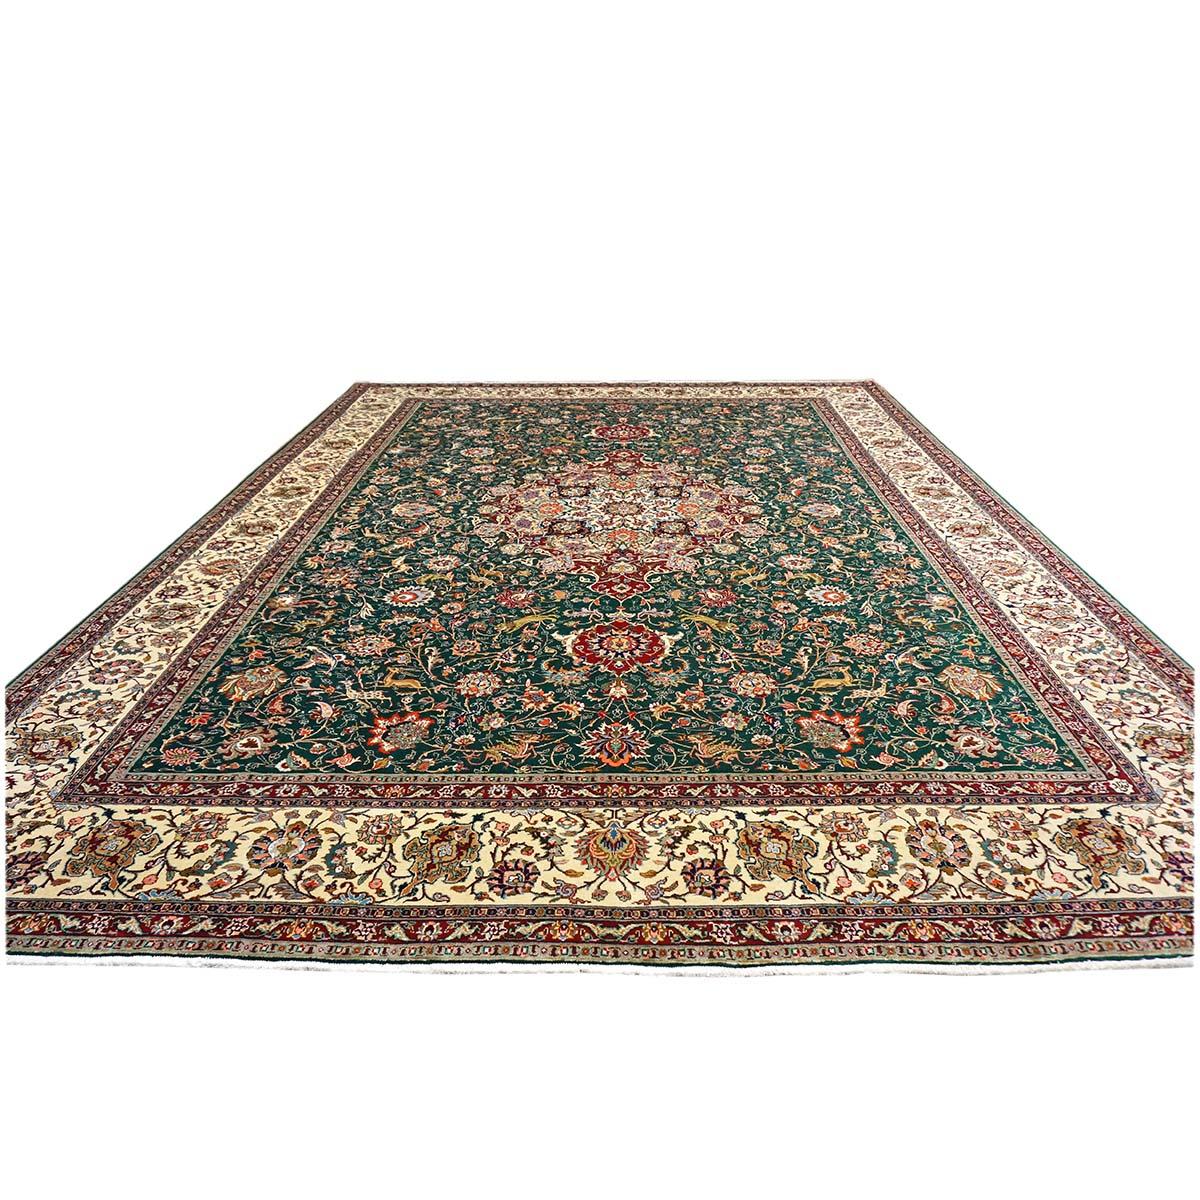 Mid-20th Century Antique Persian Tabriz 9x12 Green, Red, & Ivory Handmade Area Rug For Sale